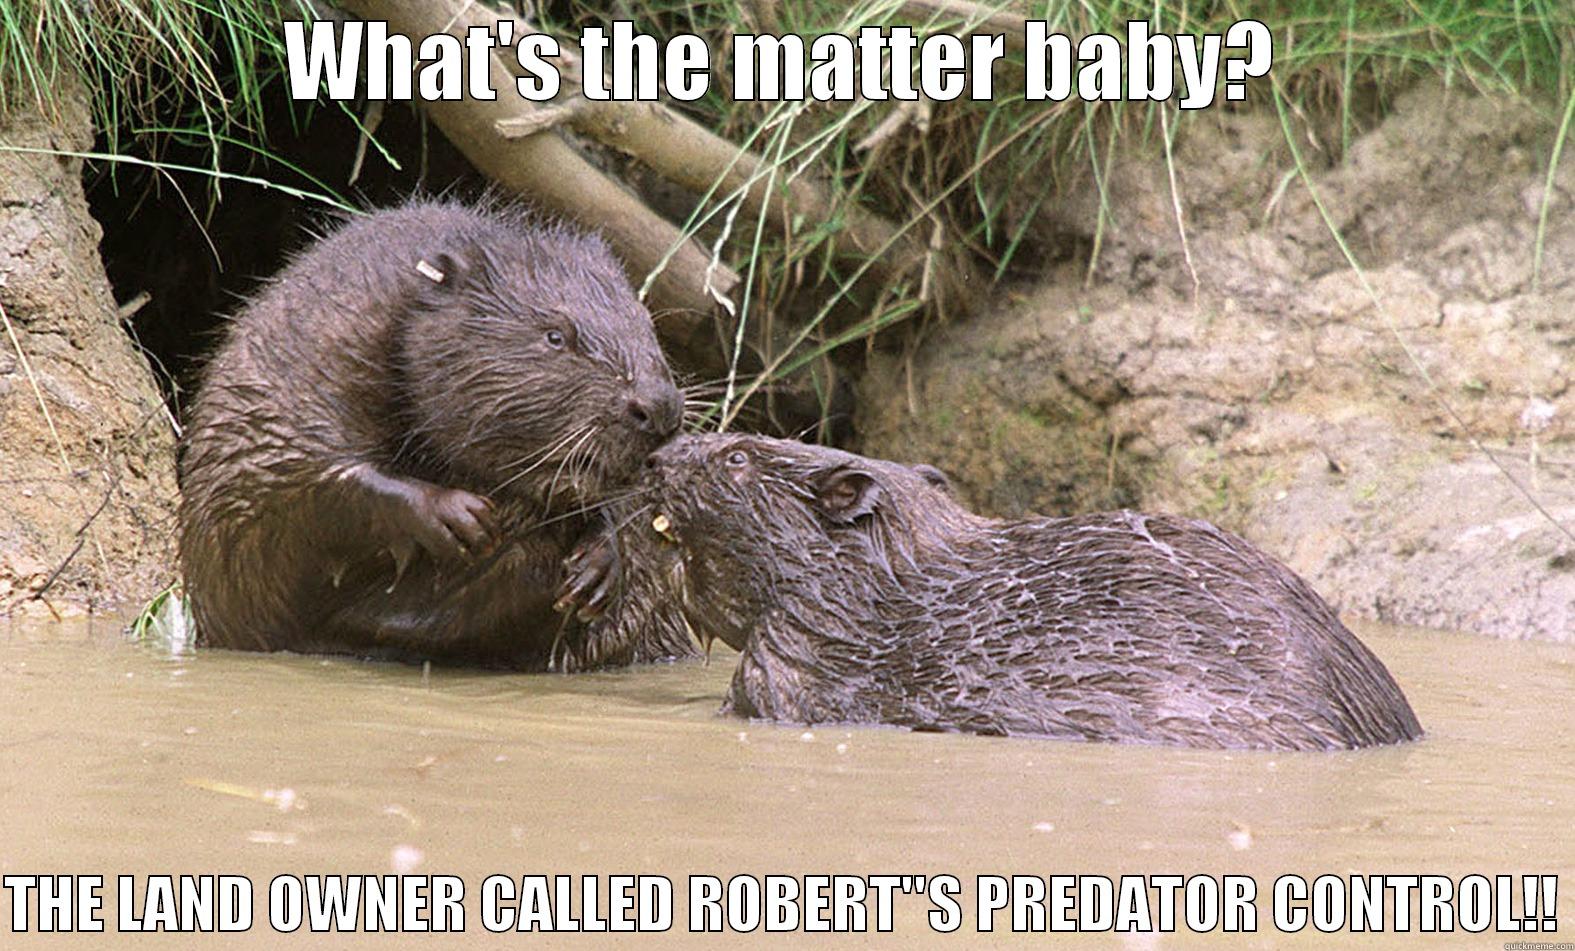 Unhappy beaver. - WHAT'S THE MATTER BABY?  THE LAND OWNER CALLED ROBERT